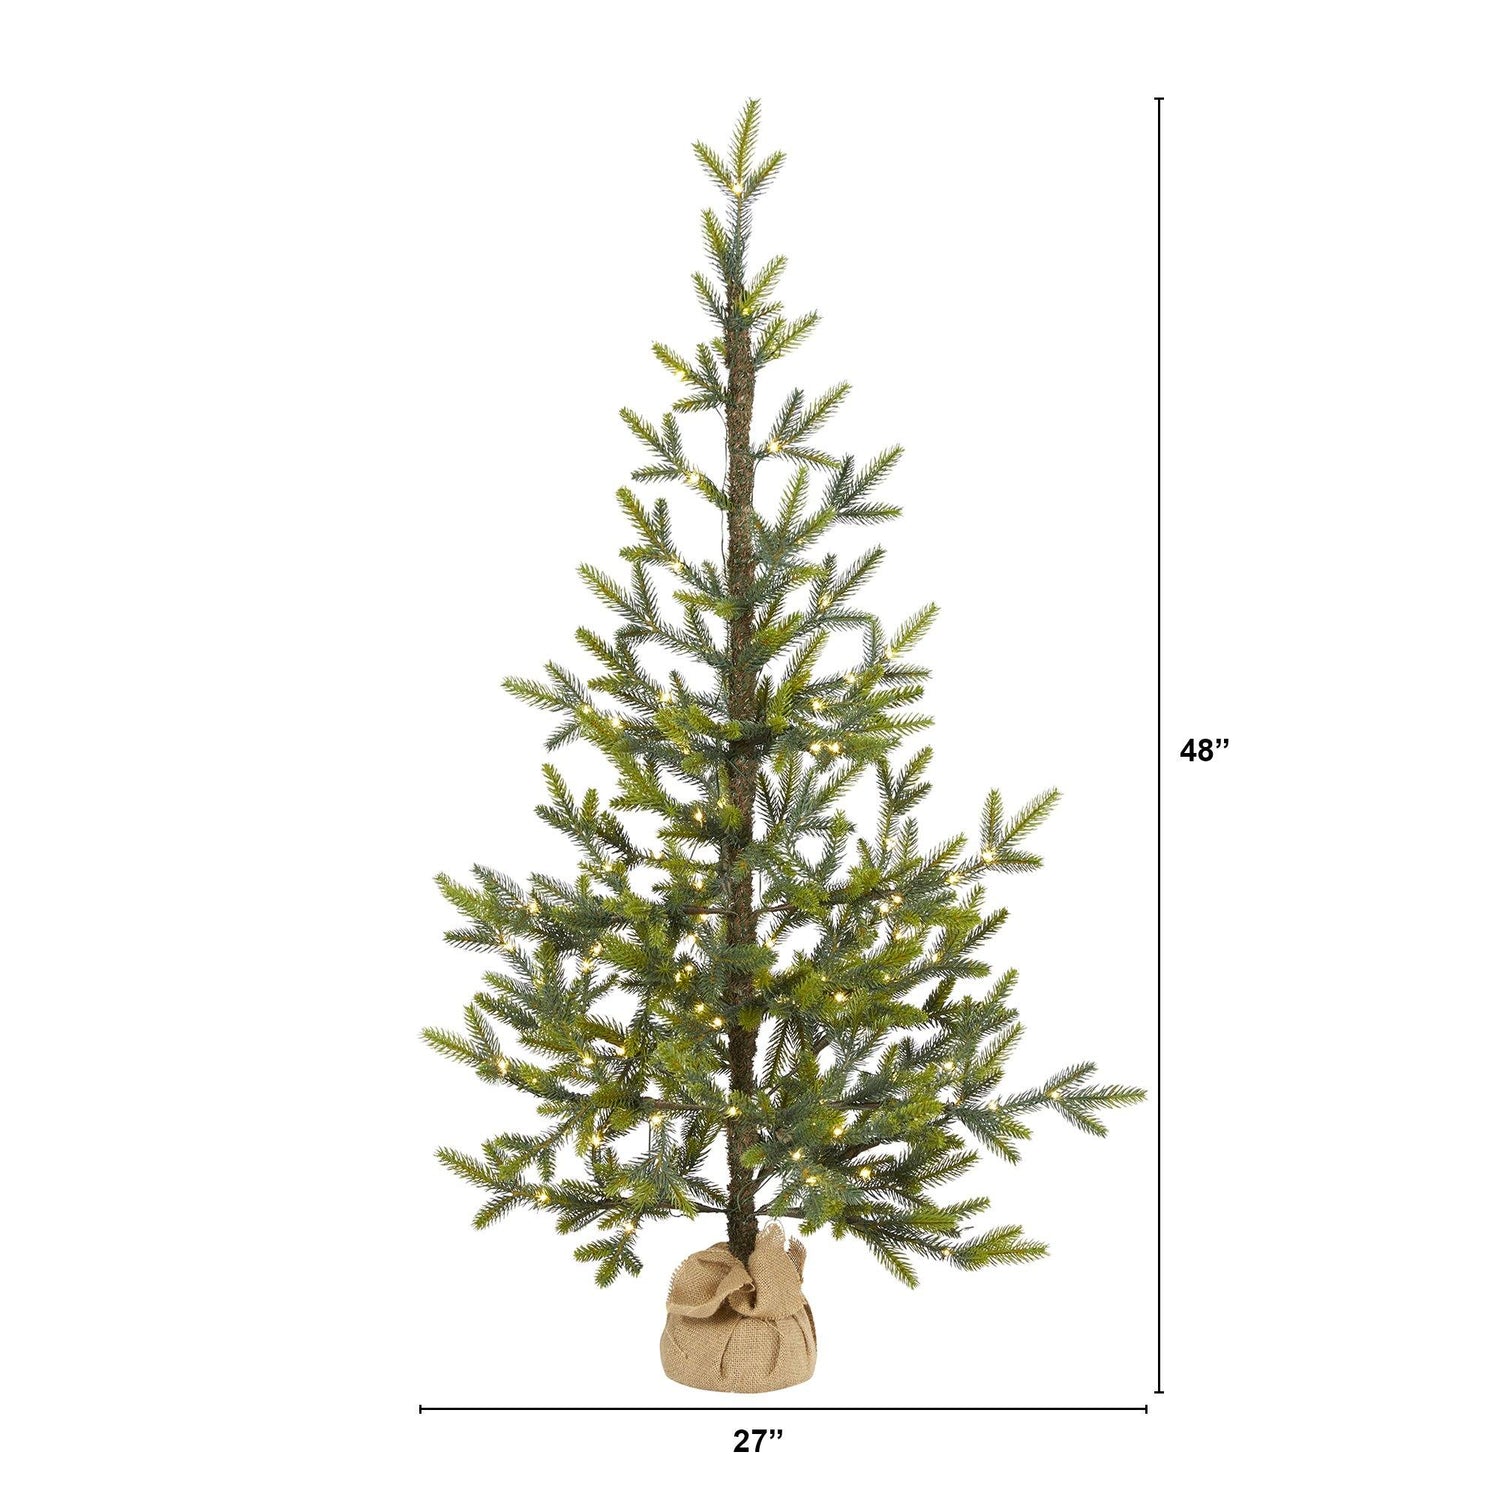 4’ Fraser Fir “Natural Look” Artificial Christmas Tree with 100 Clear LED Lights, a Burlap Base and 403 Bendable Branches